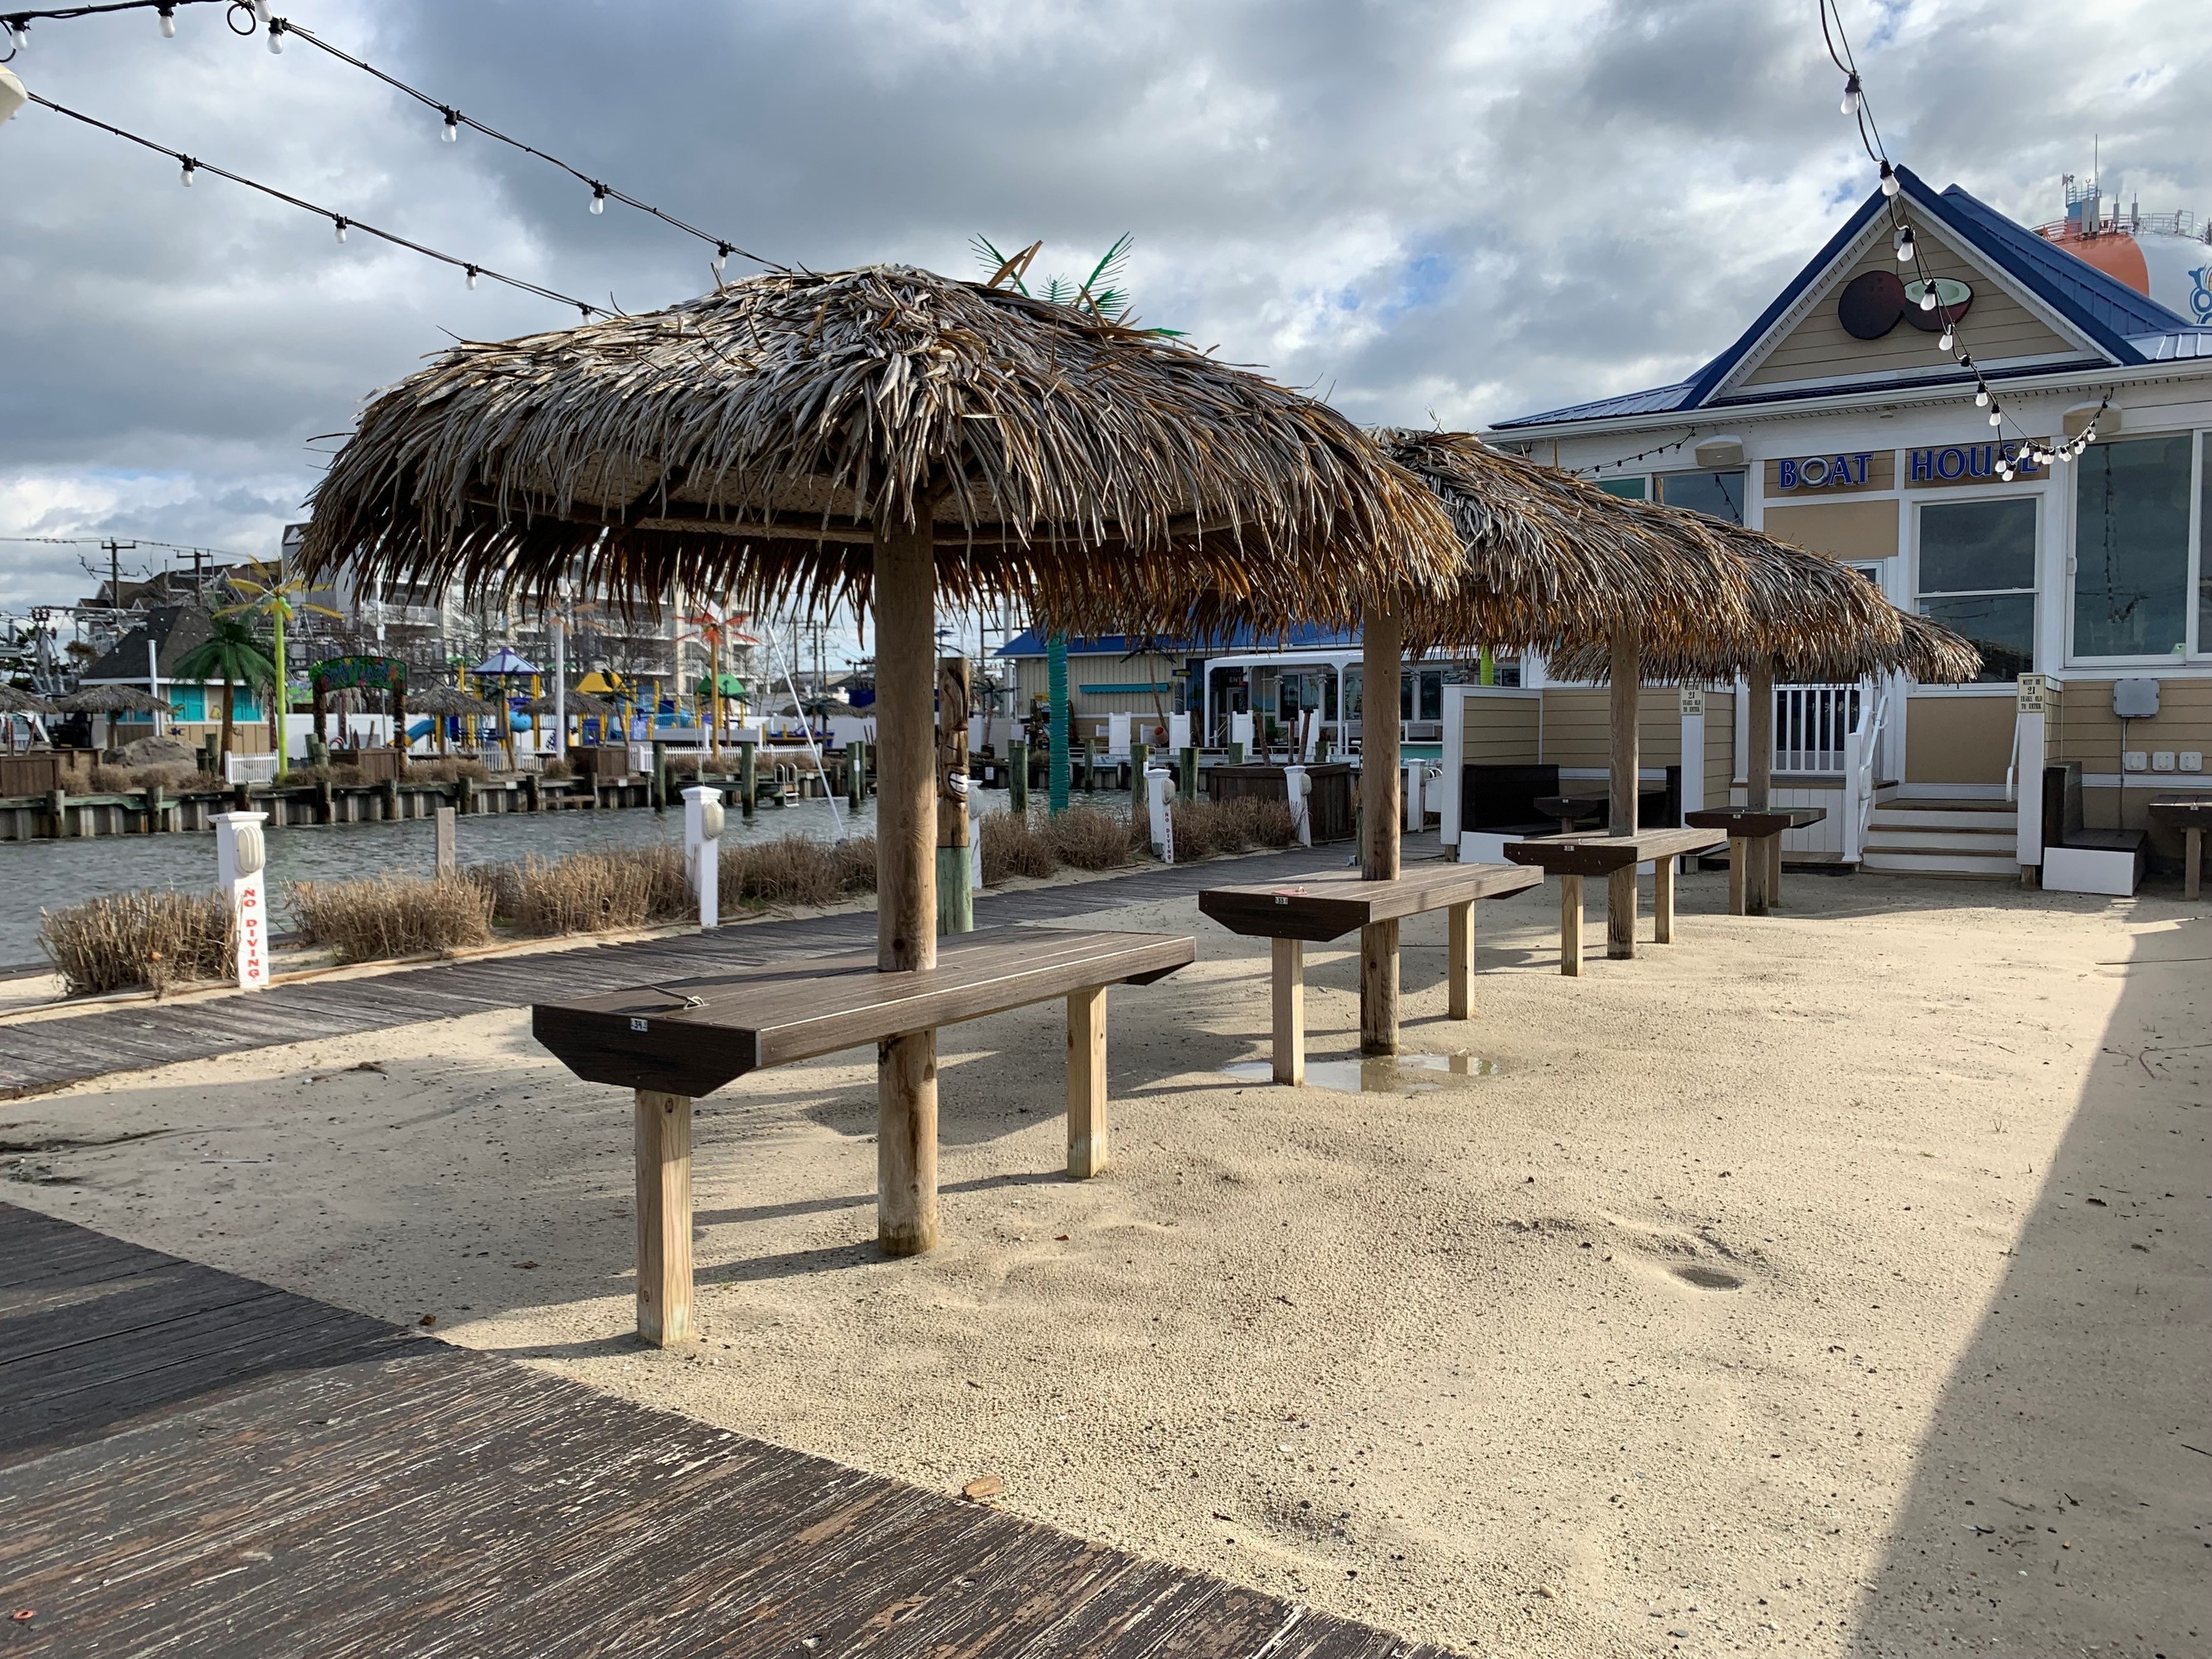 De Lazy Lizard, one of many accessible dock and dine restaurants